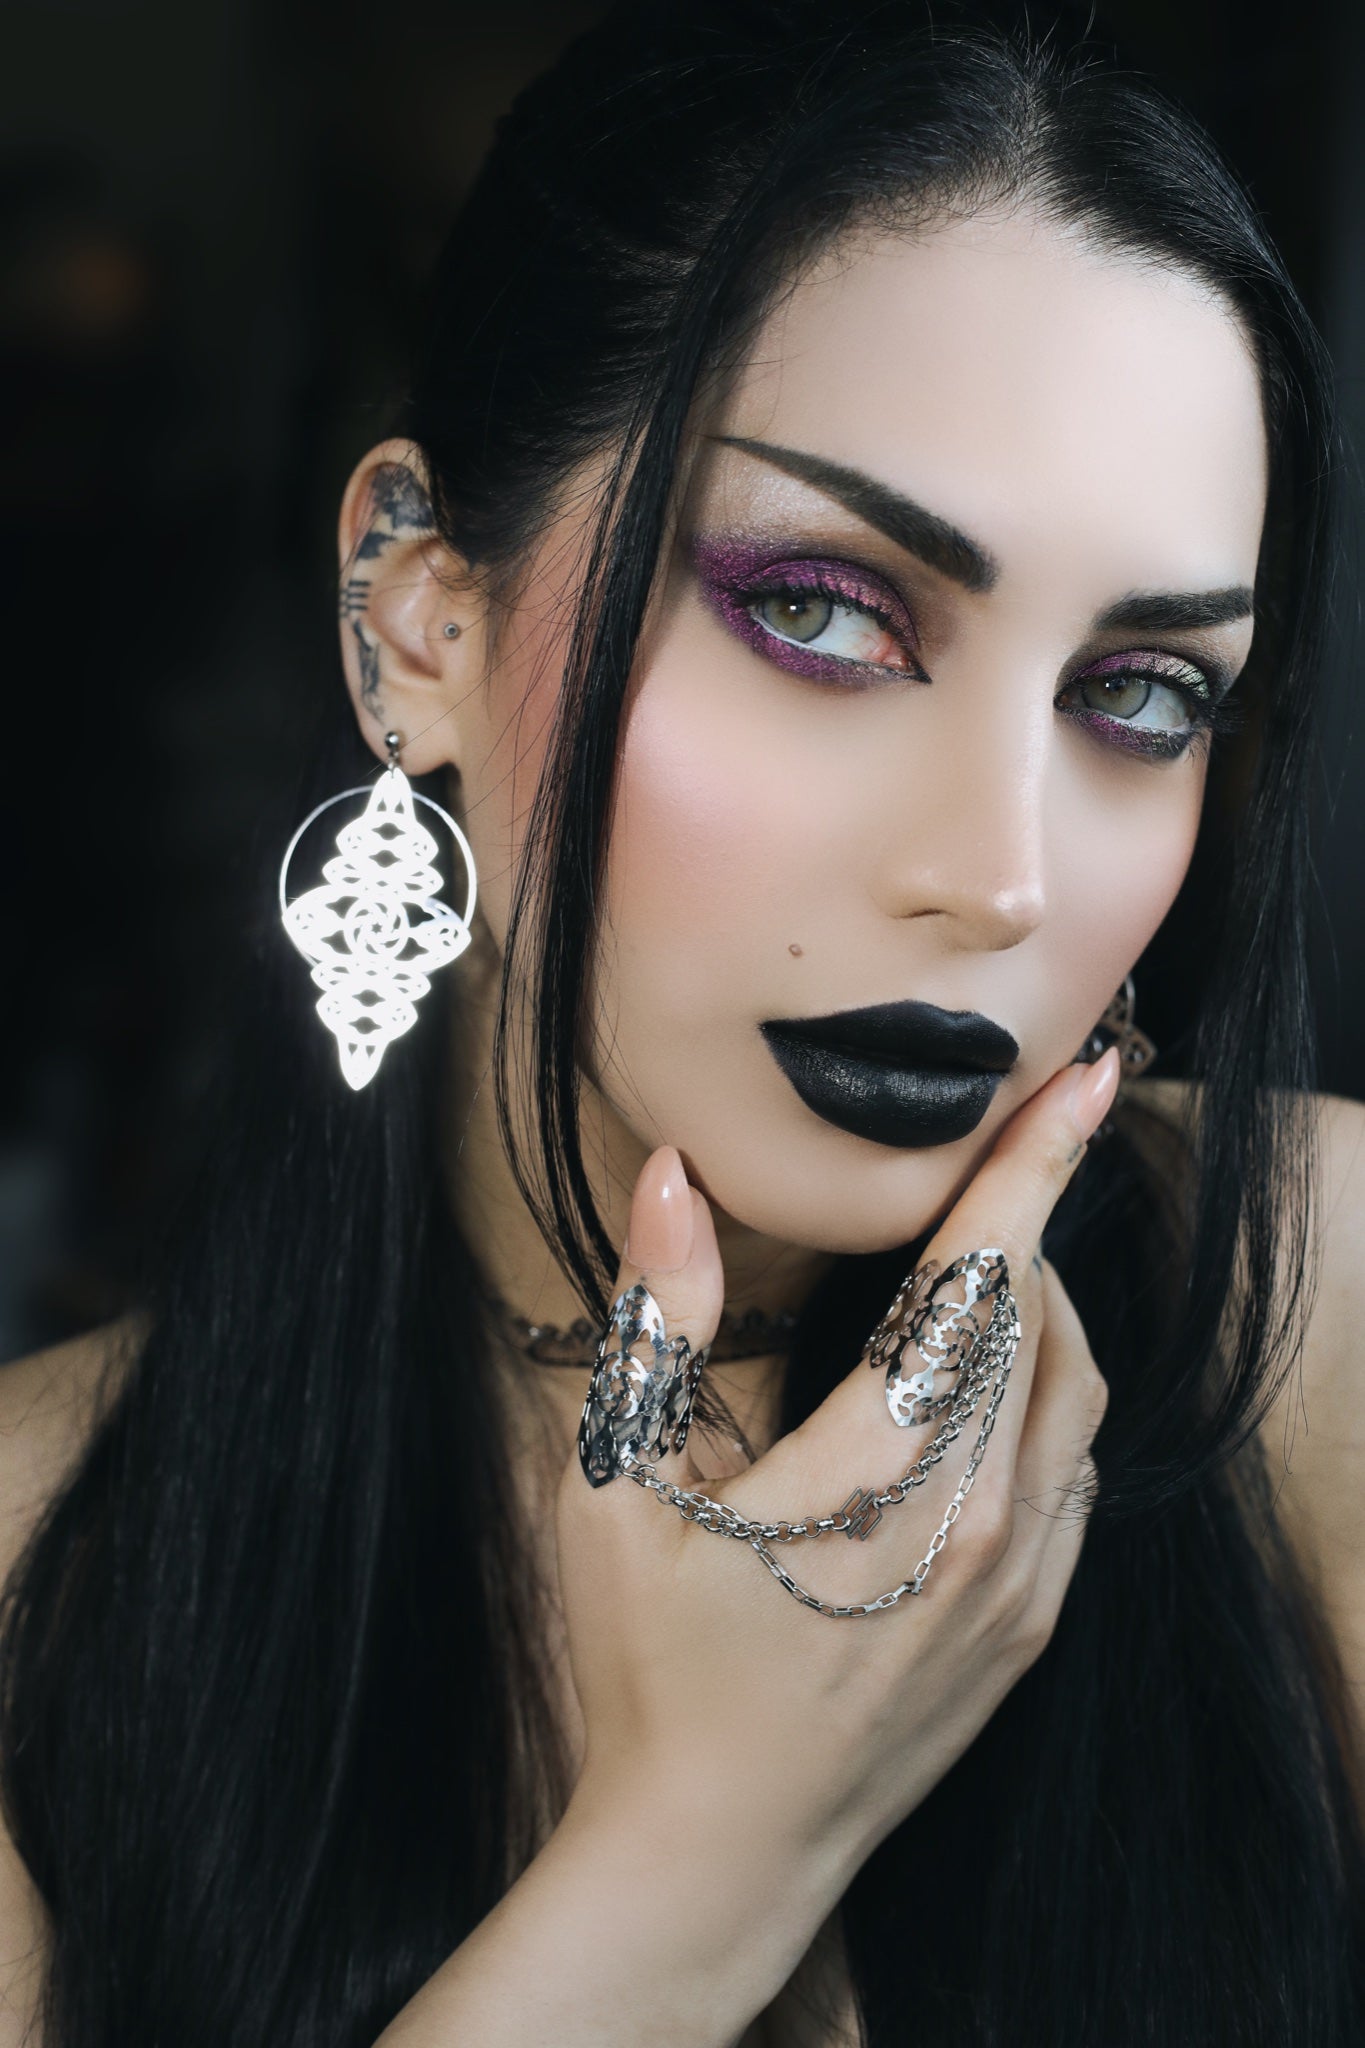 A striking gothic model with bold black lipstick and shimmering purple eye makeup showcases Myril Jewels' intricate accessories. She wears ornate white filigree earrings and matching rings connected by a delicate chain, exemplifying the dark-avantgarde aesthetic. Ideal for those embracing neo-gothic style or looking for bold witchcore accessories.